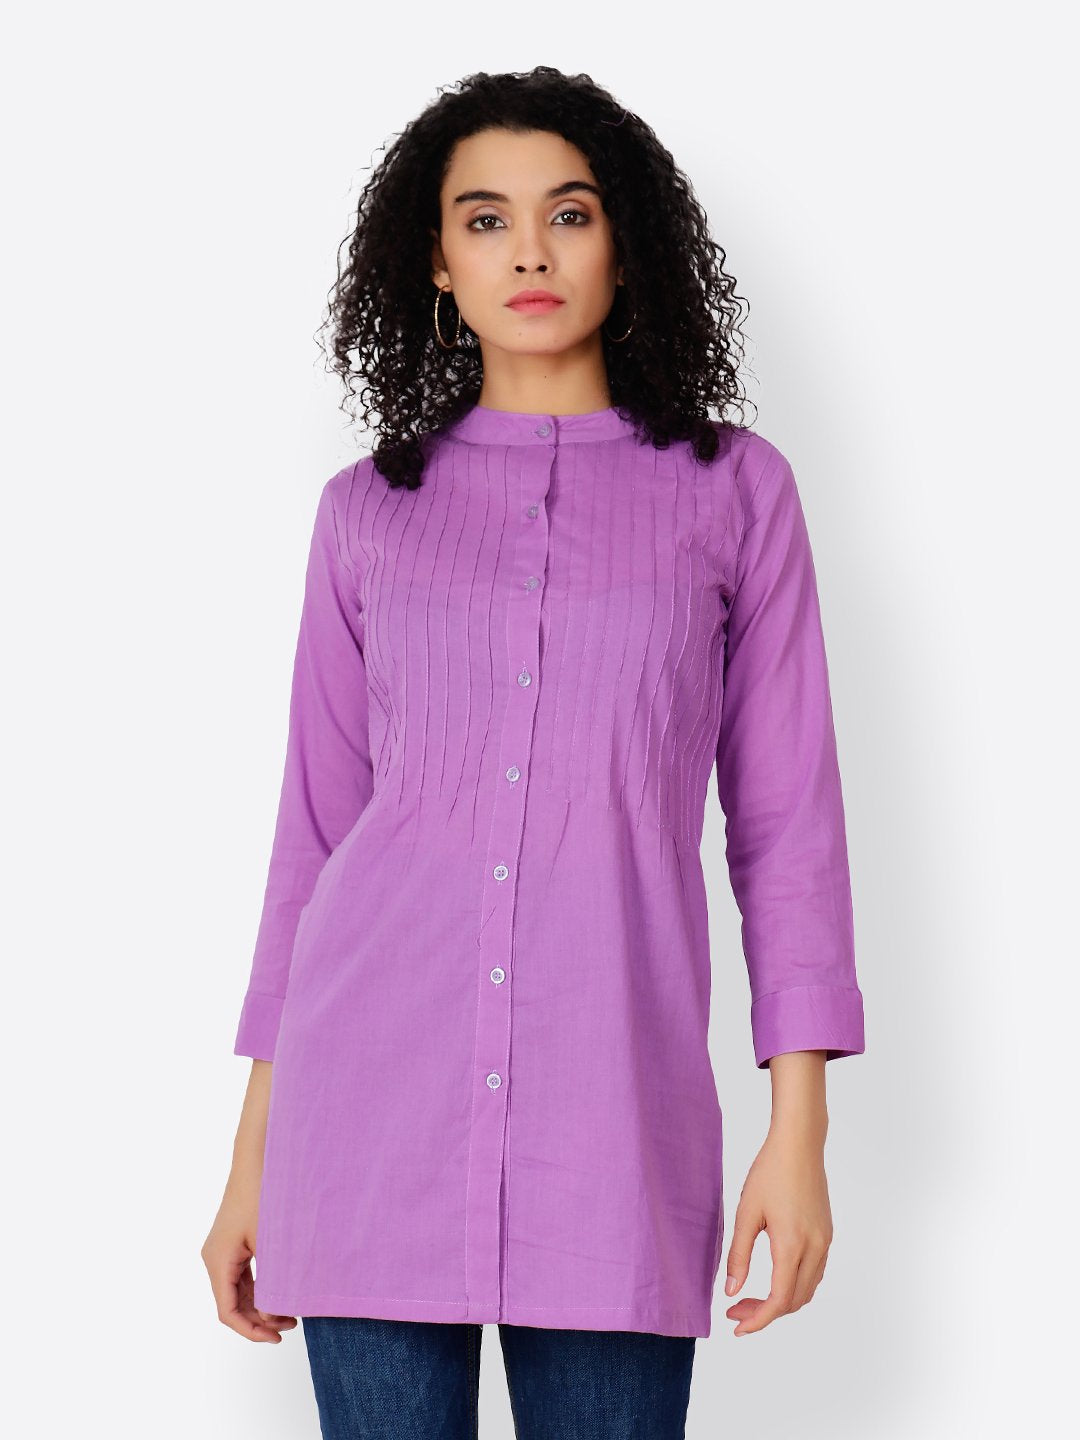 Cation Lavender Tunic